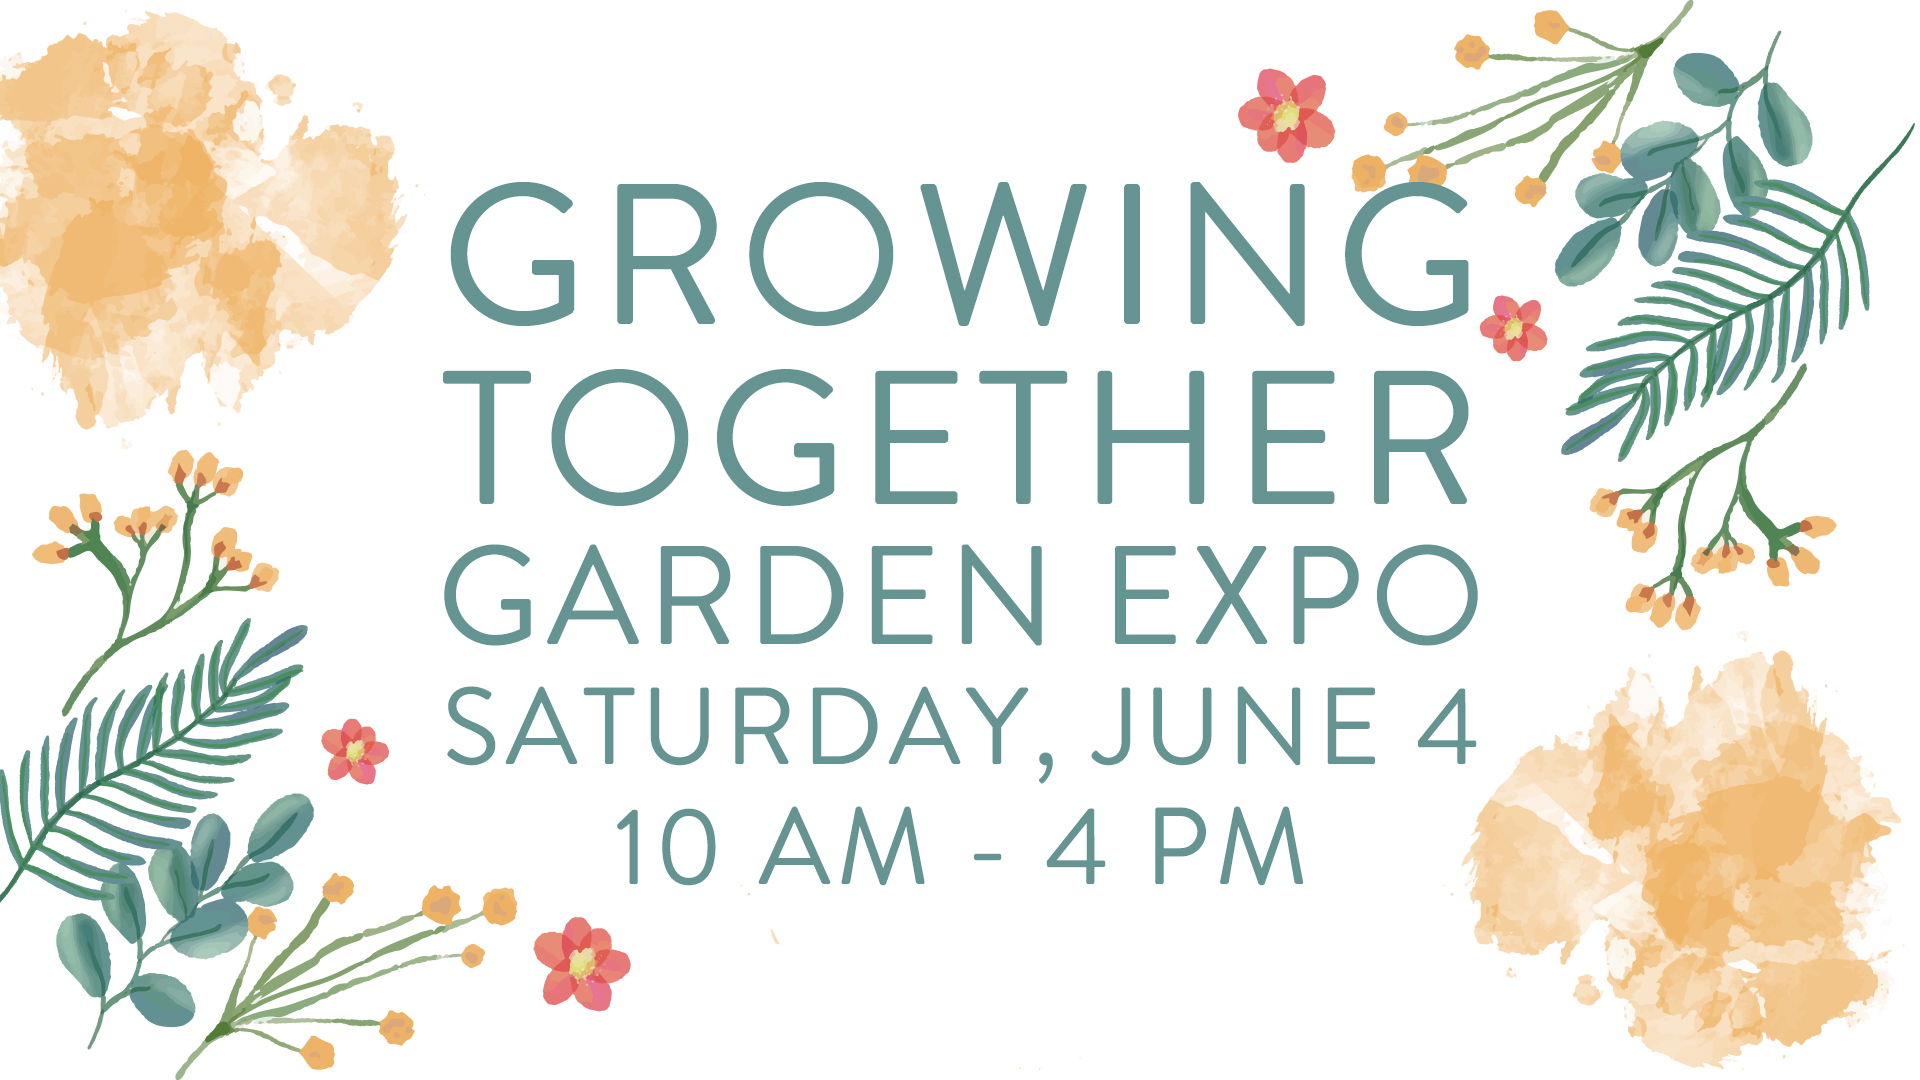 Flowers and plants in greens and yellows around corners, text reading Growing Together Garden Expo, Saturday, June 4, 10 am to 4 pm